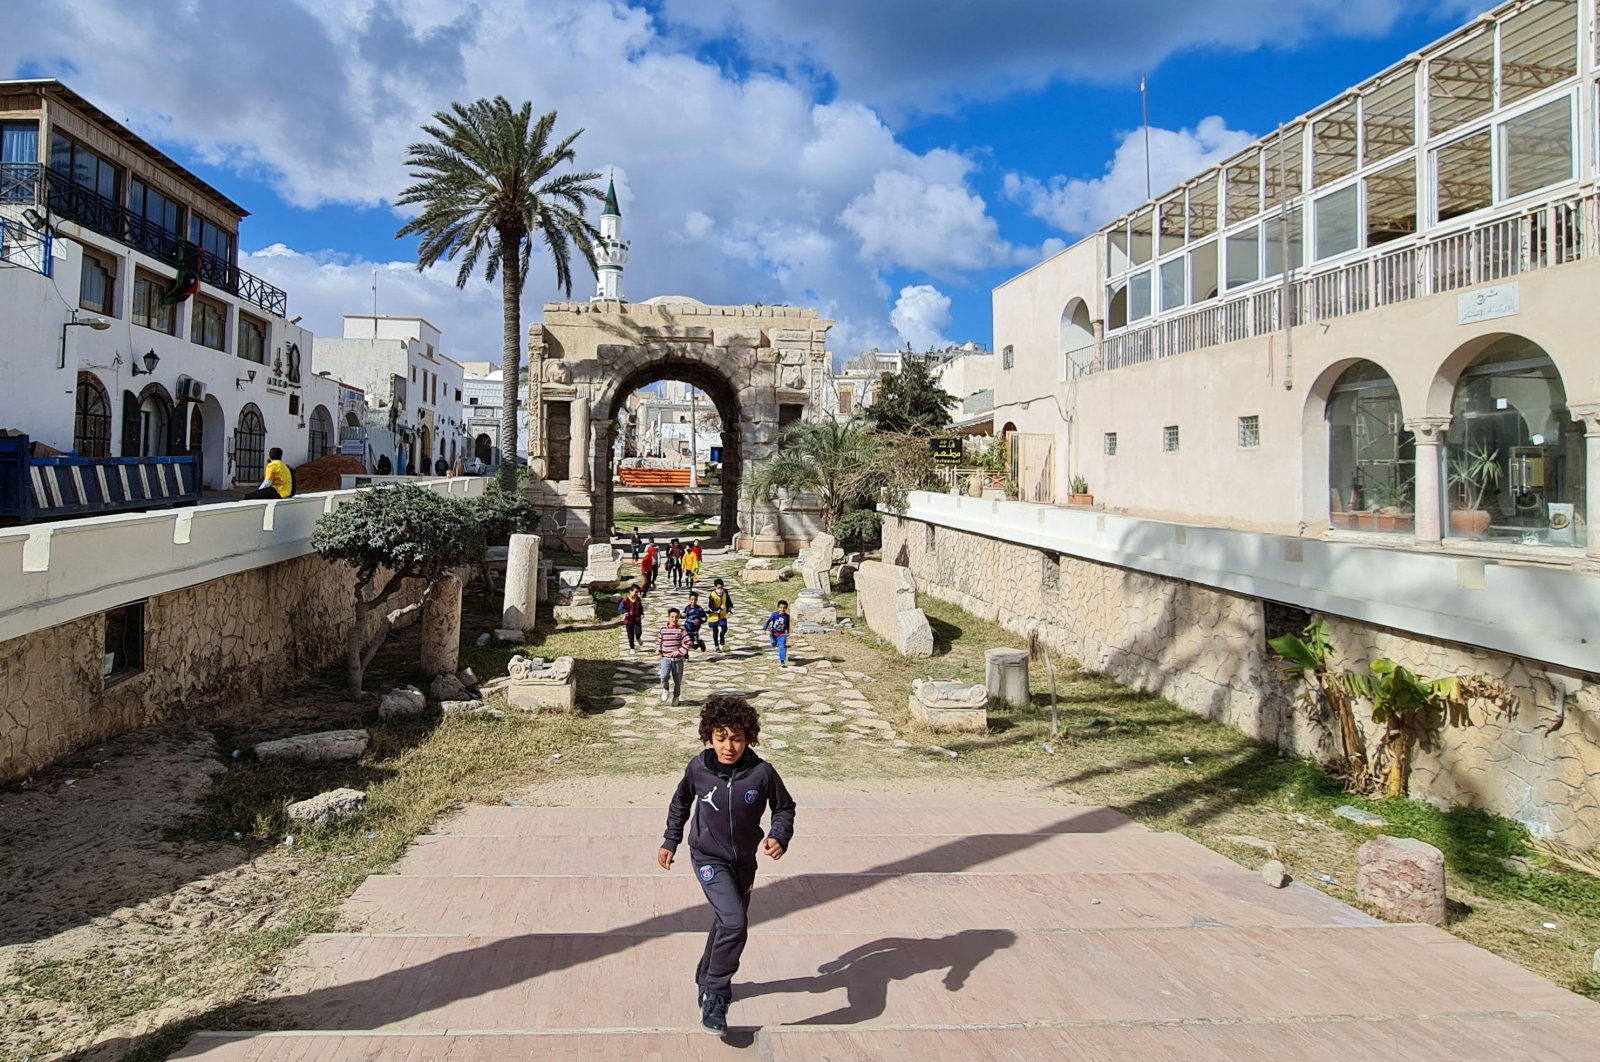 Children play in the old city, which is undergoing infrastructure rehabilitation work, Tripoli, Libya, March 23, 2021. (AFP Photo)